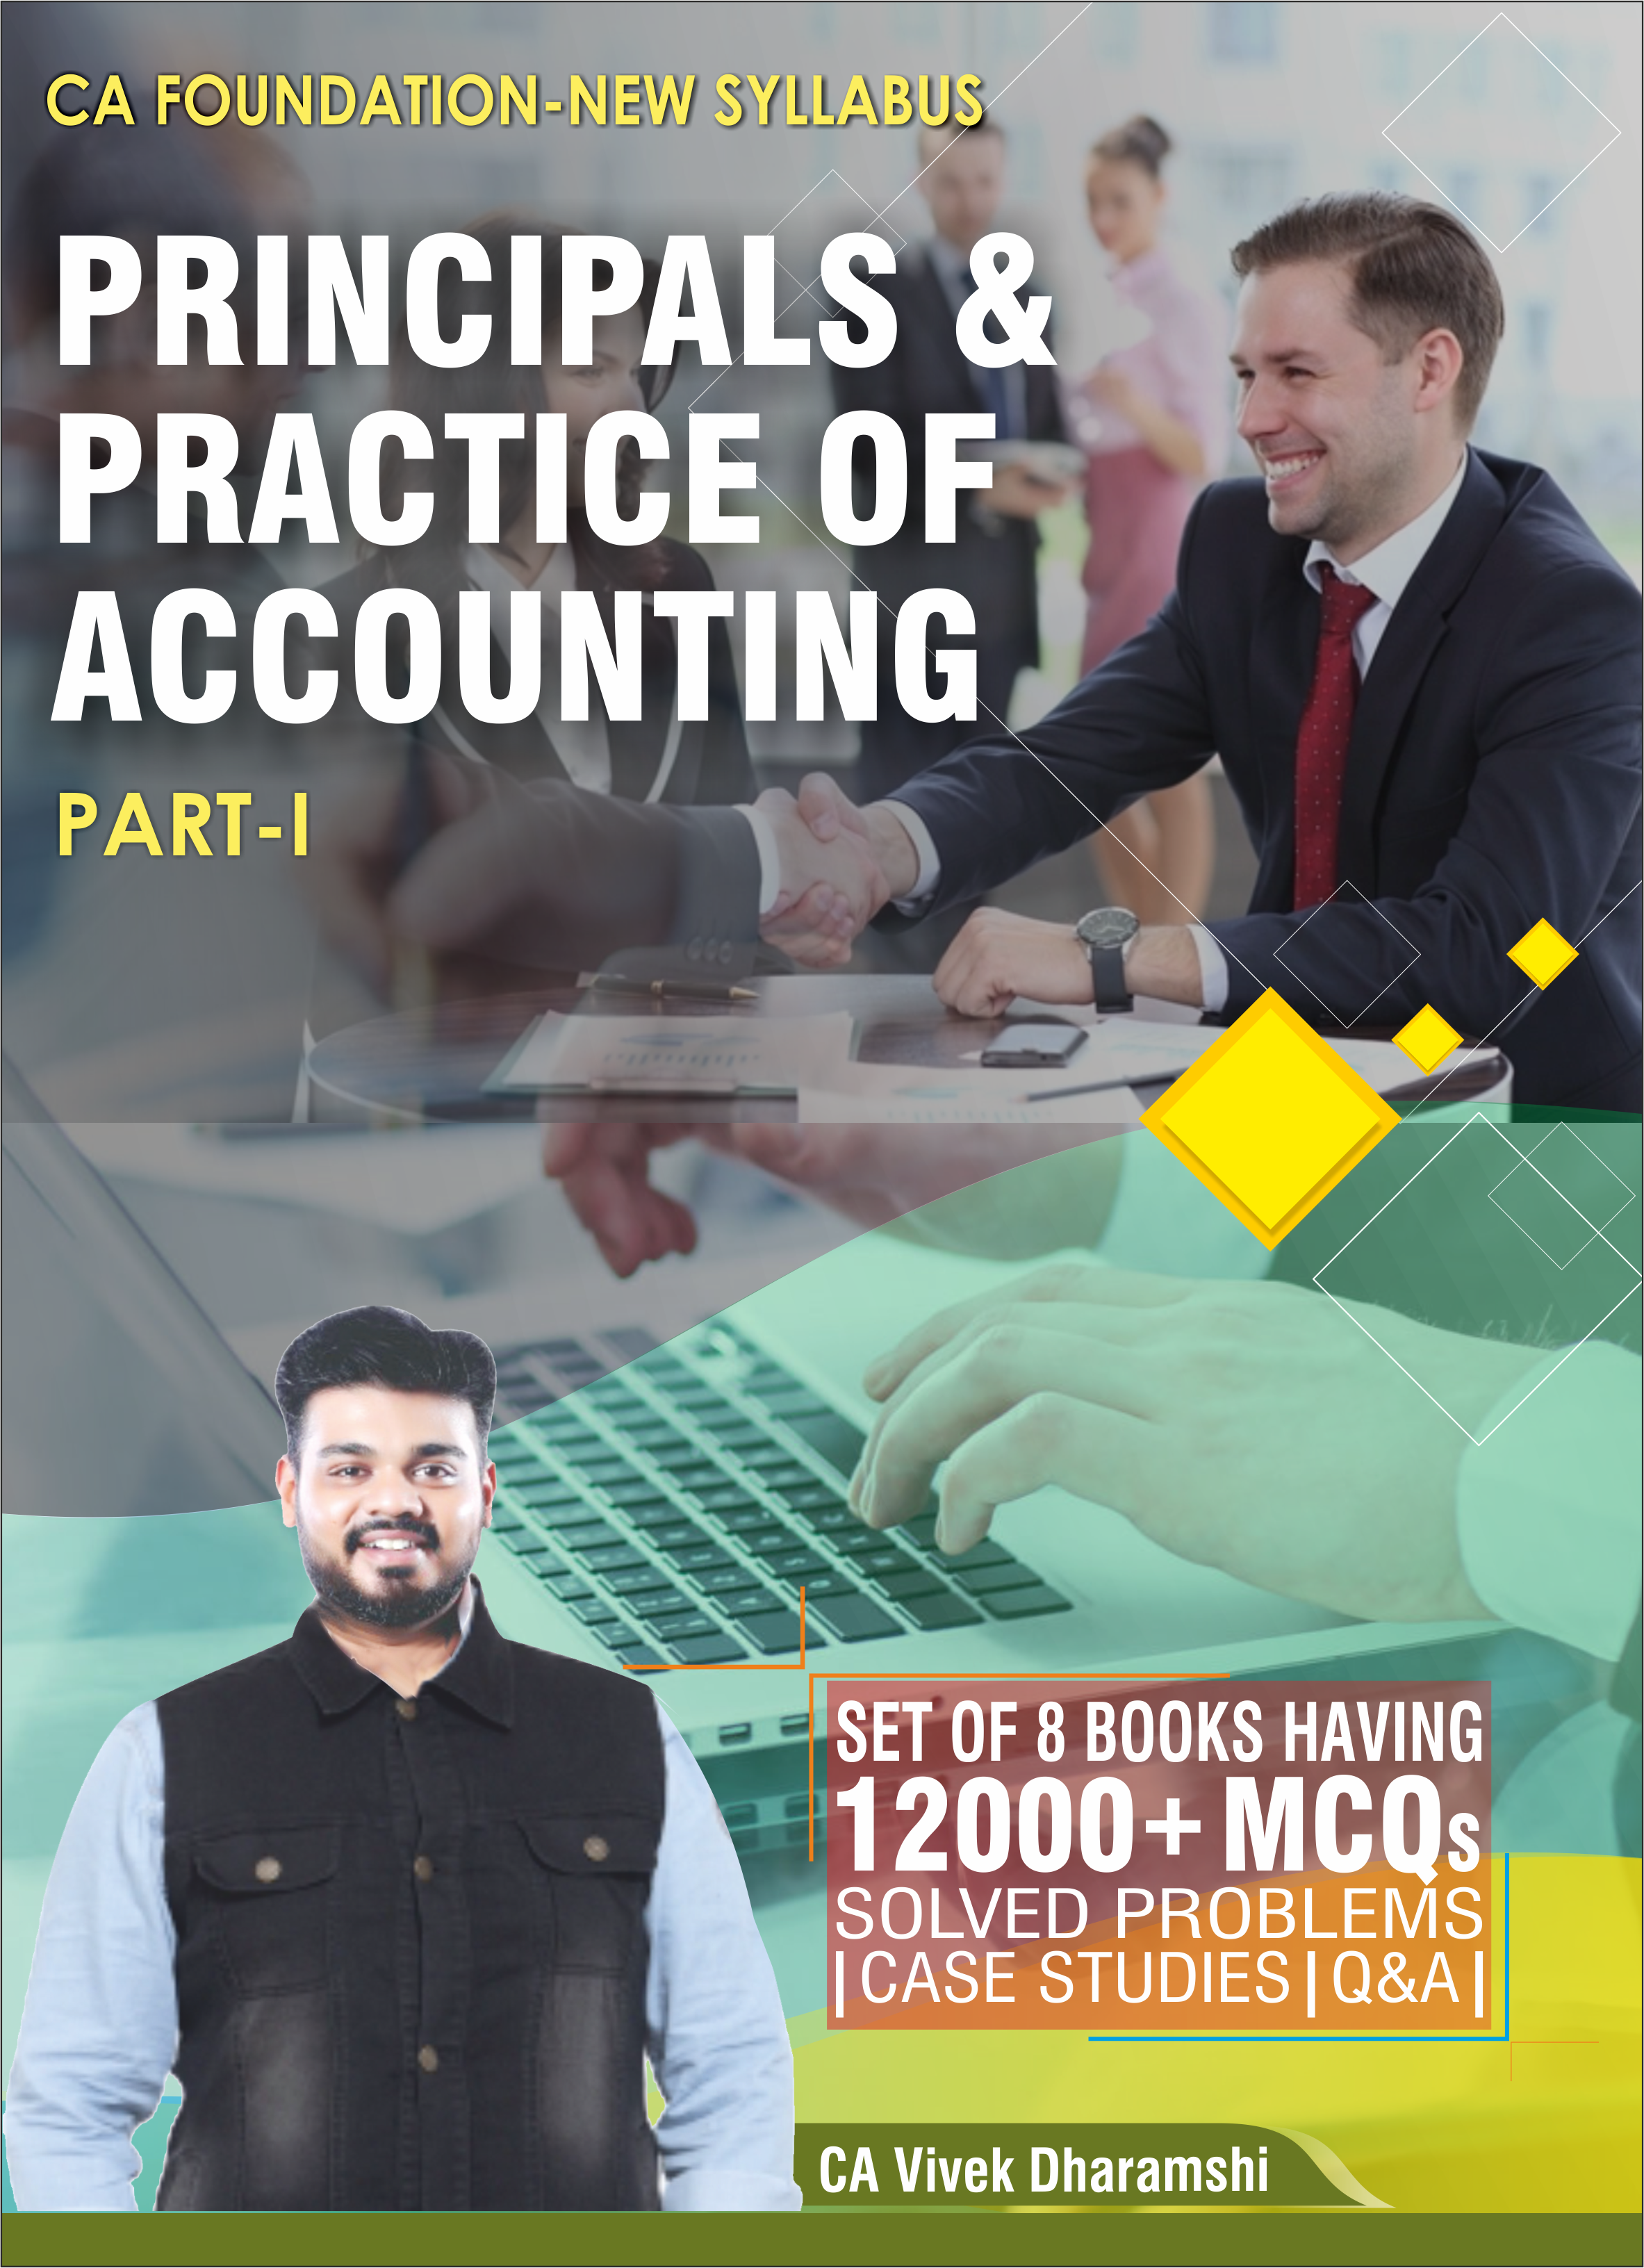 CA_Foundation_–_Principles_andd_Practices_of_Accounting_Part_1_only_